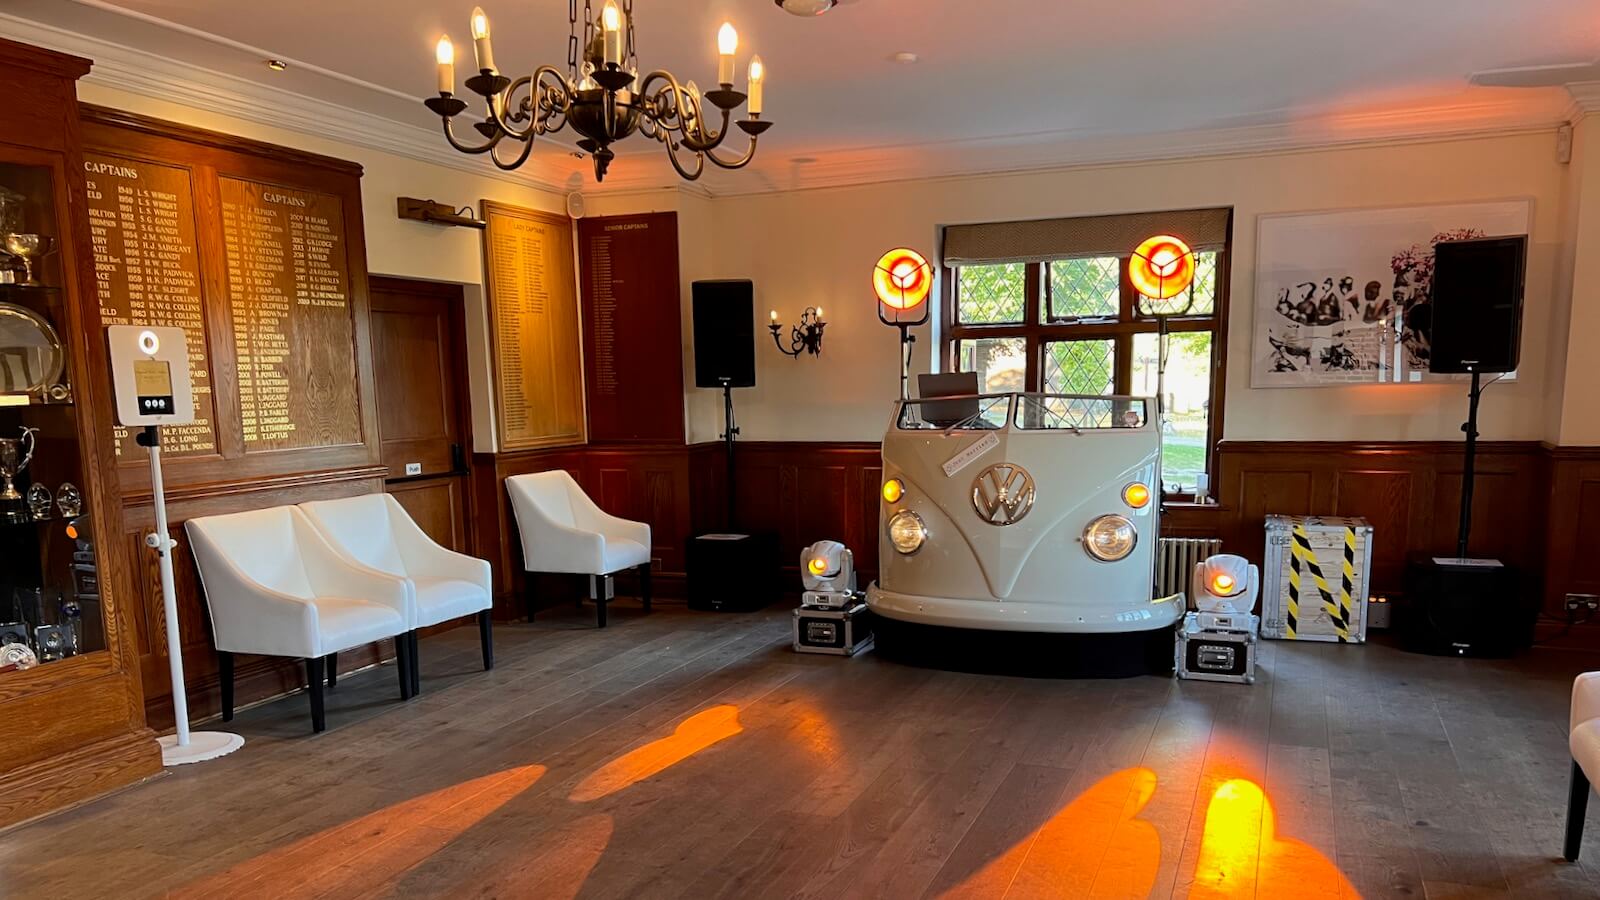 Martin and Kerry's wedding DJ system with VW DJ booth, Mannings Heath Wine and Golf Estate